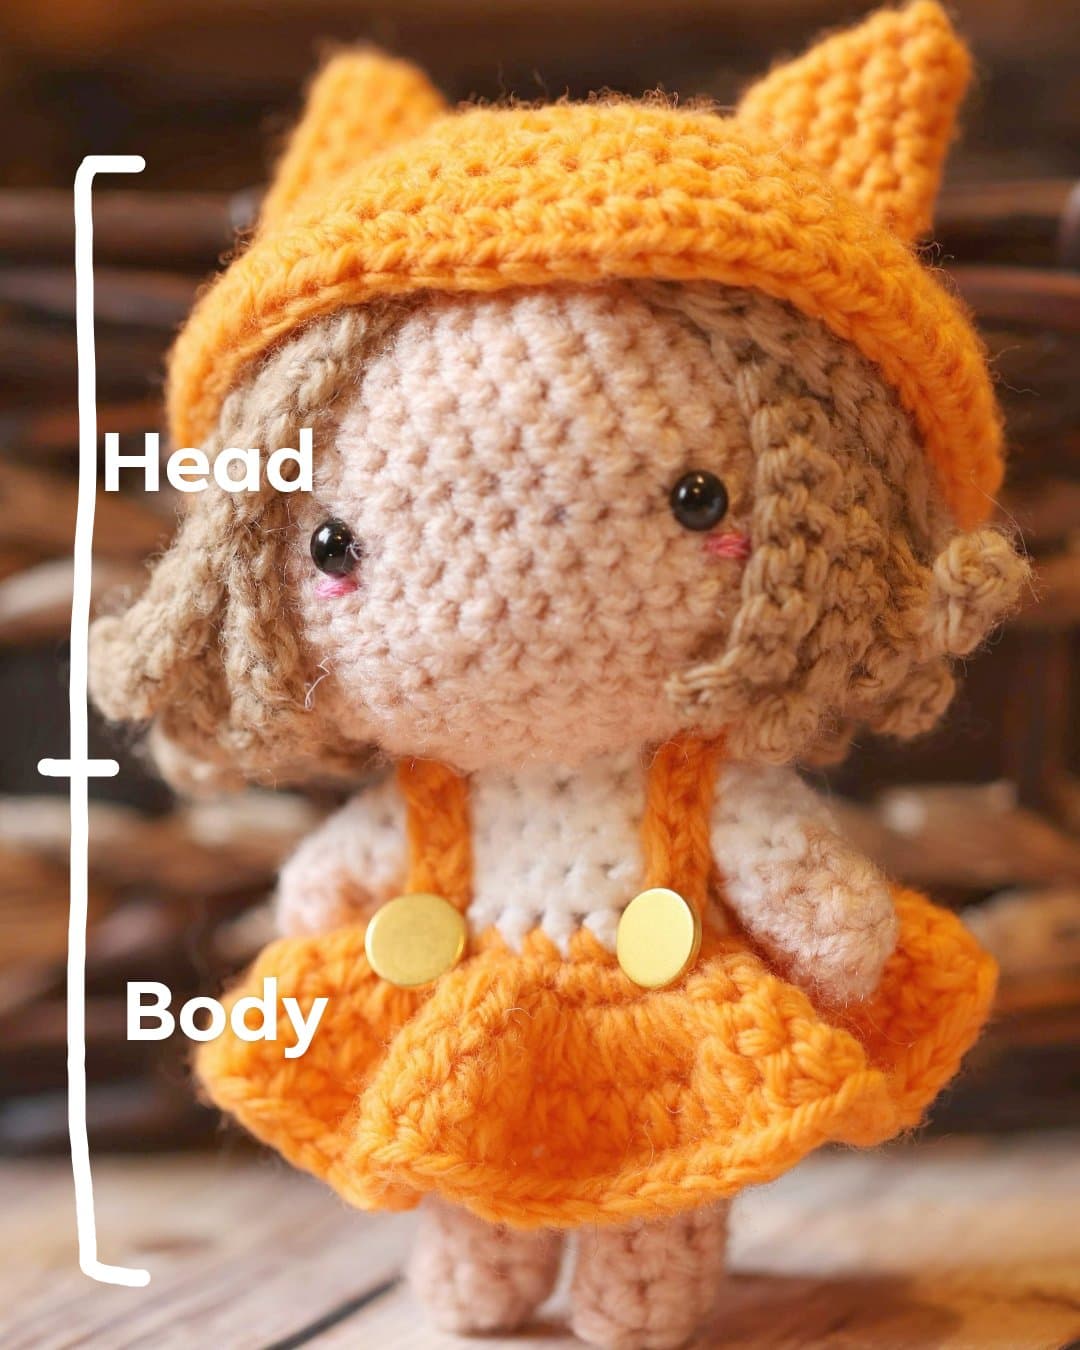 Crochetree - Have you already tried to embroider your crochet dolls eyes?  It's not difficult at all, just takes some time and a little bit of  practice. Any Crochetree doll pattern has